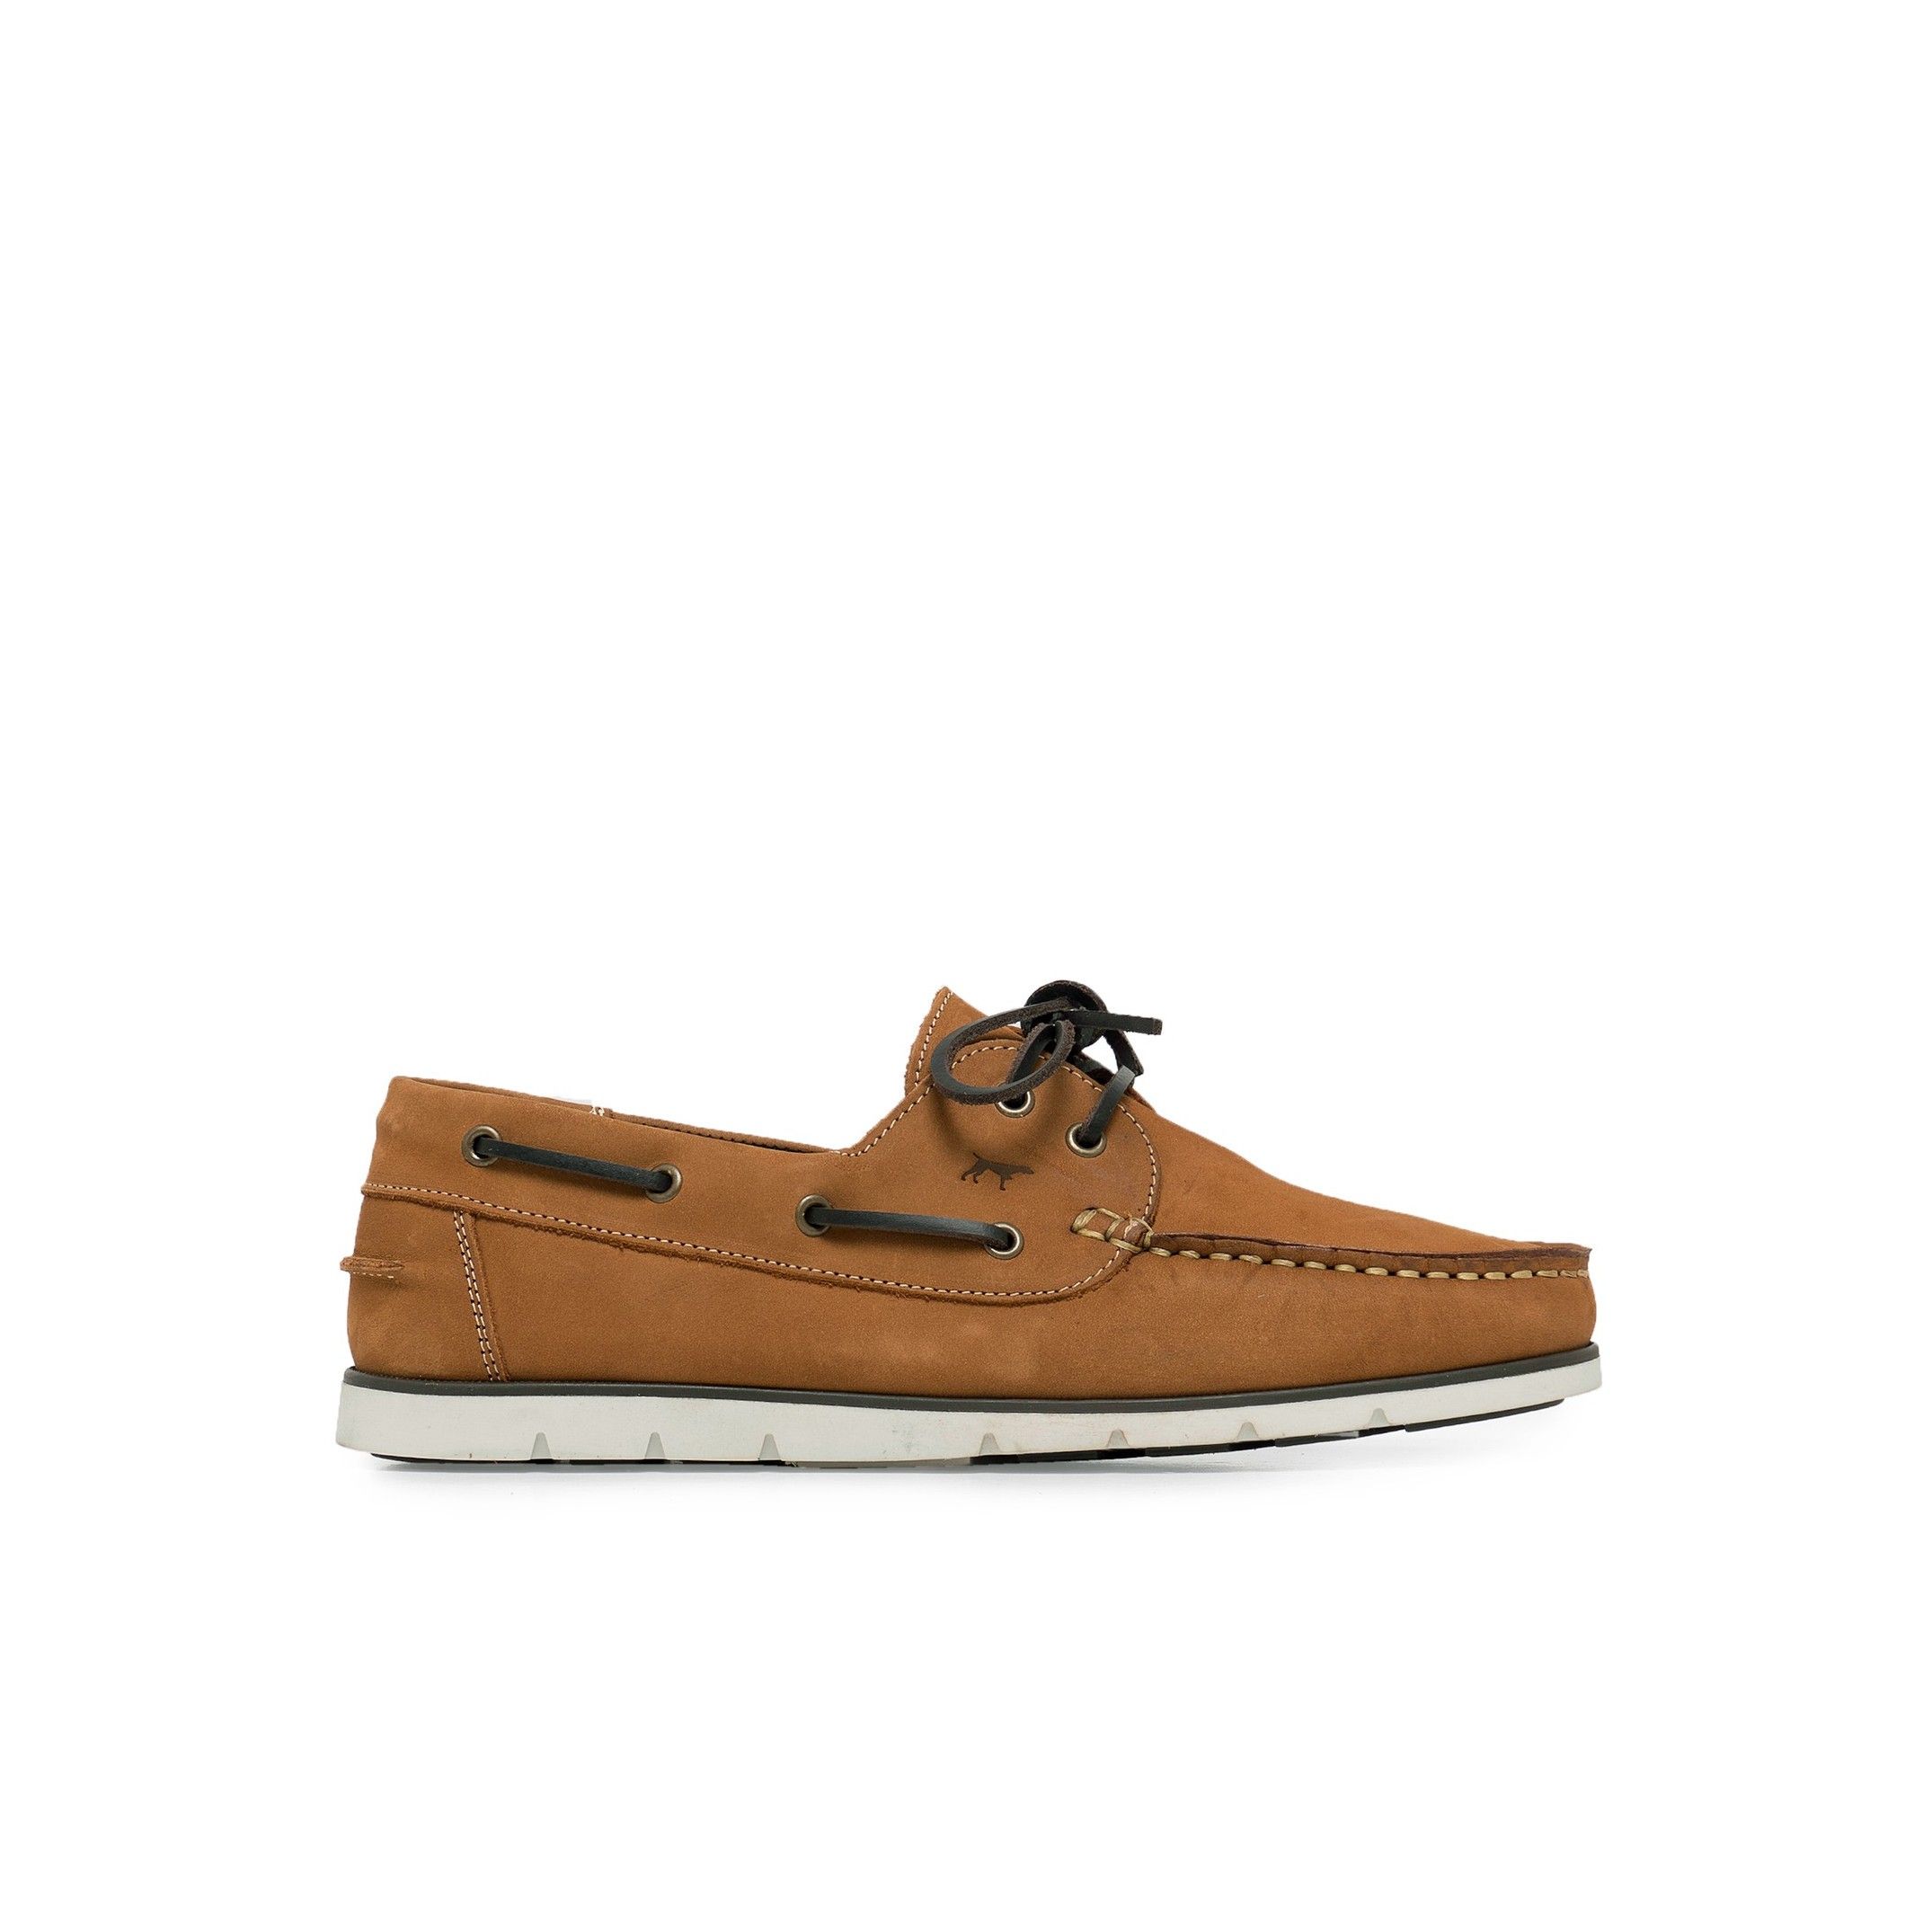 Nubuck leather boat shoes, by Son Castellanisimos. Upper made of cowhide leather. Leather laces closure. Inner and insole made of cowhide leather. Sole material: synthetic and non slip.  Heel height: 1'5 cm. Designed and made in Spain.